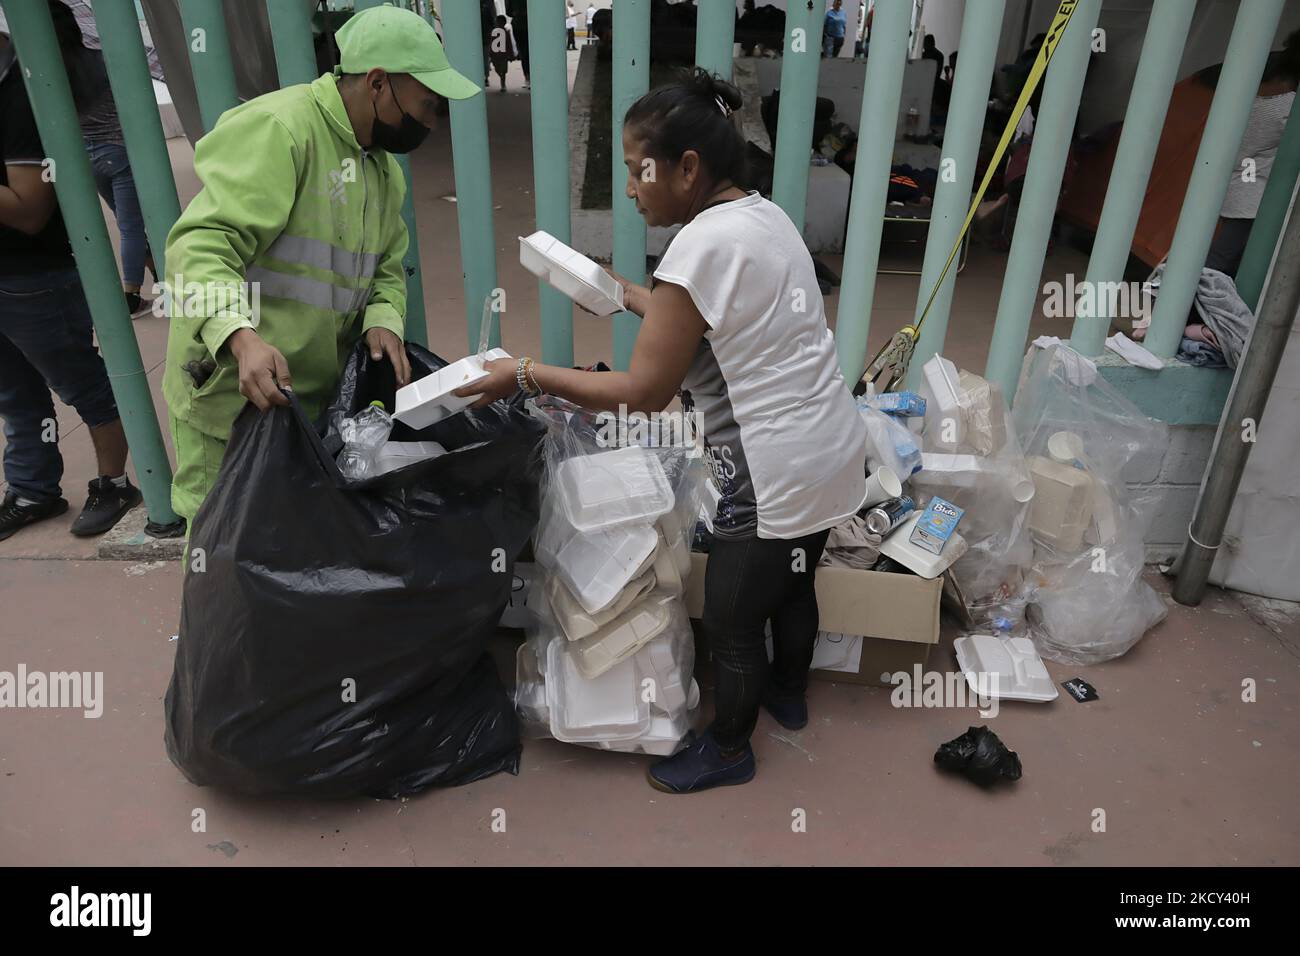 Members of the migrant caravan and clean-up workers separate rubbish at the Casa Peregrino in Mexico City during their temporary stay in the capital. (Photo by Gerardo Vieyra/NurPhoto) Stock Photo